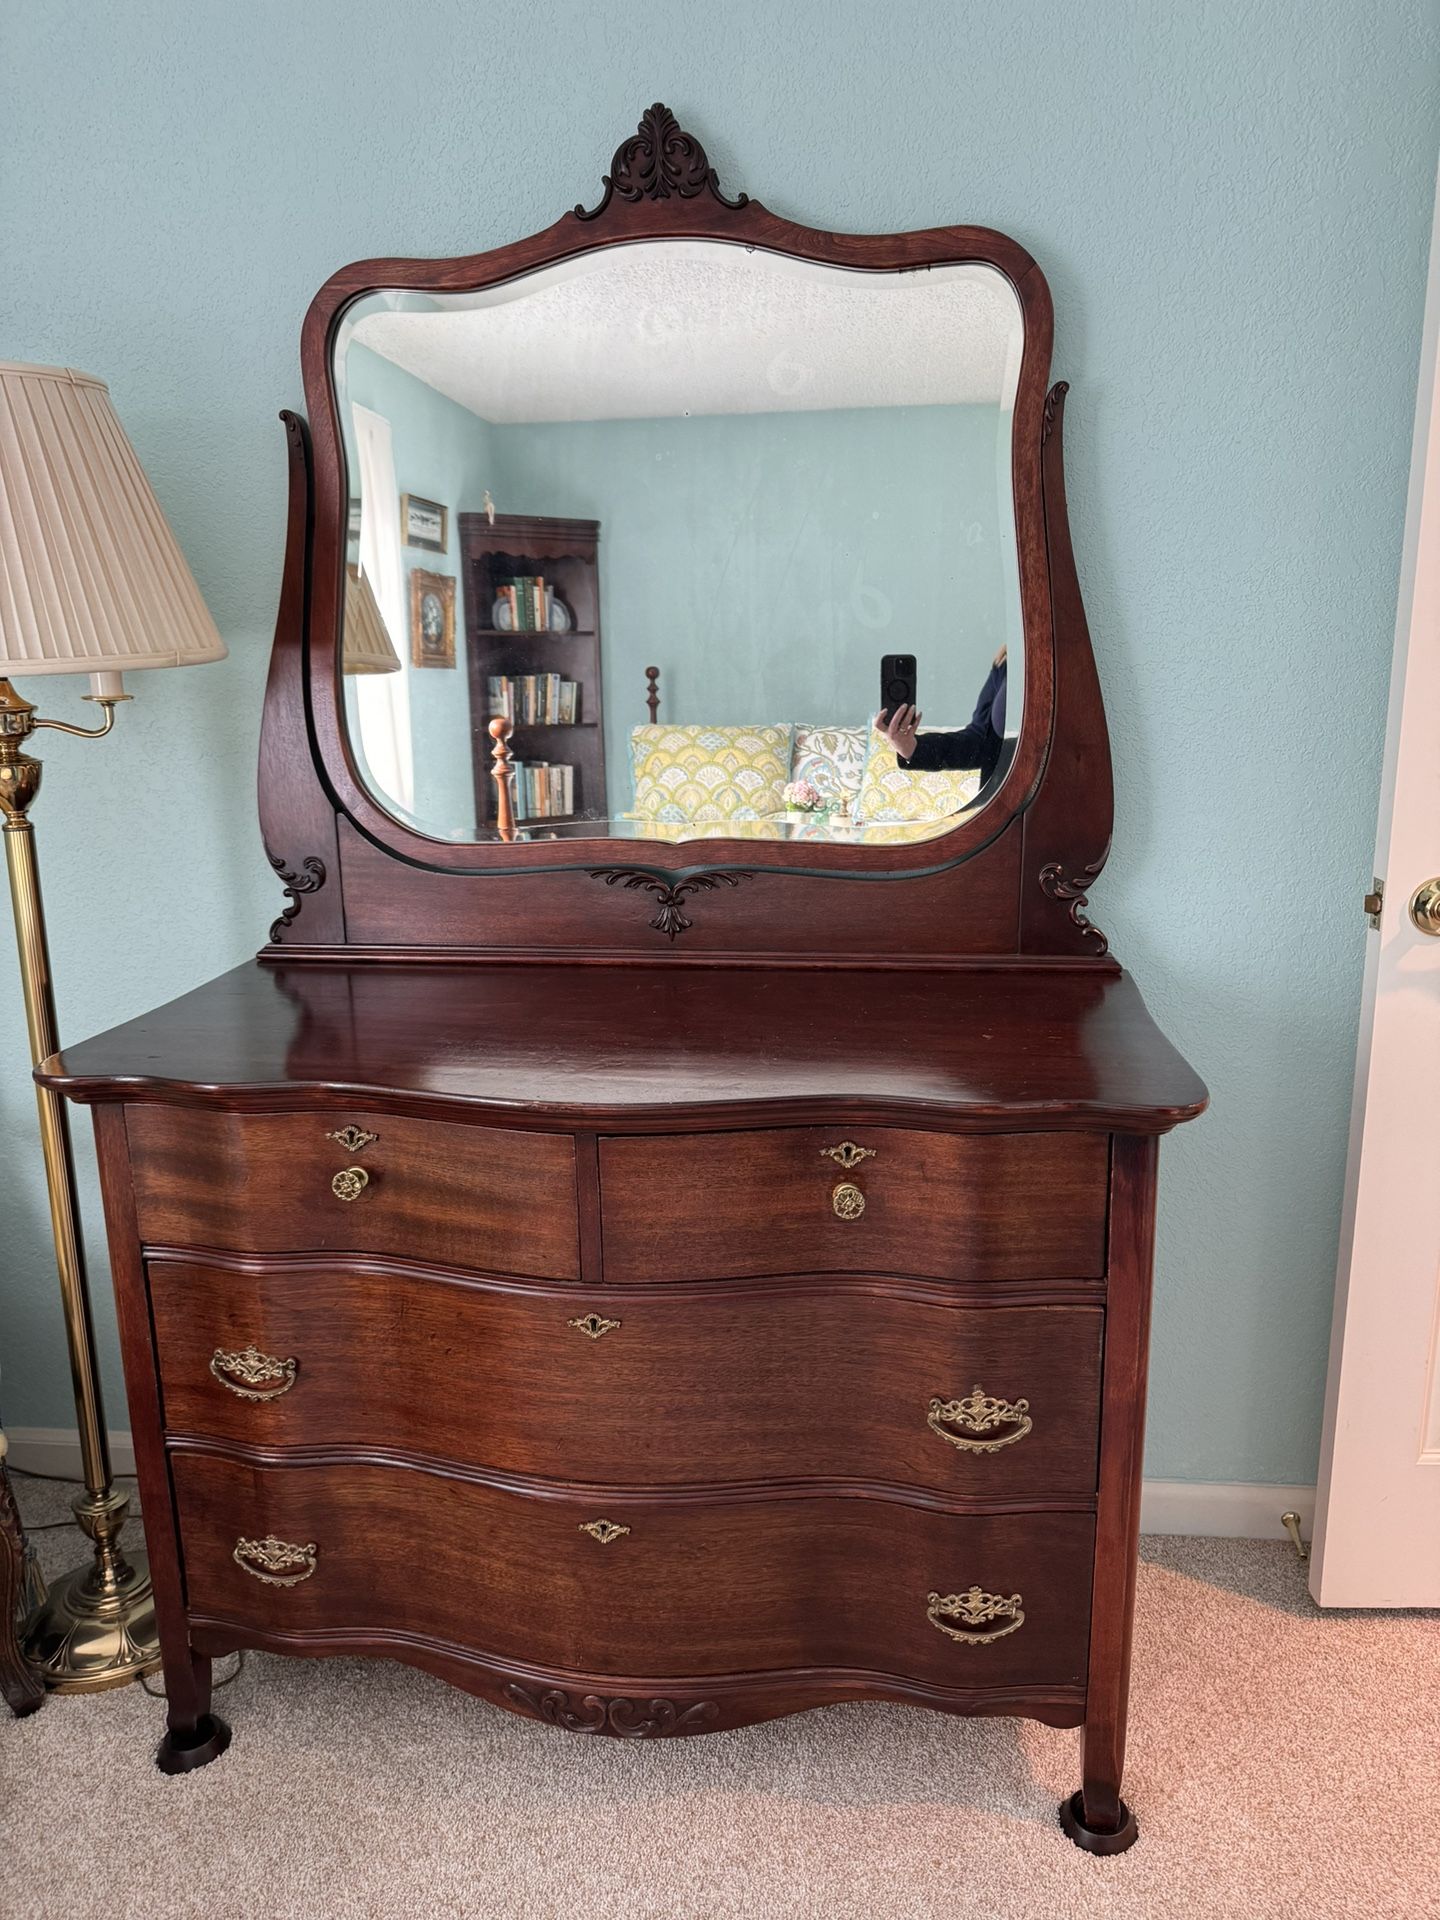 Mirror-topped Solid Mahogany Dresser